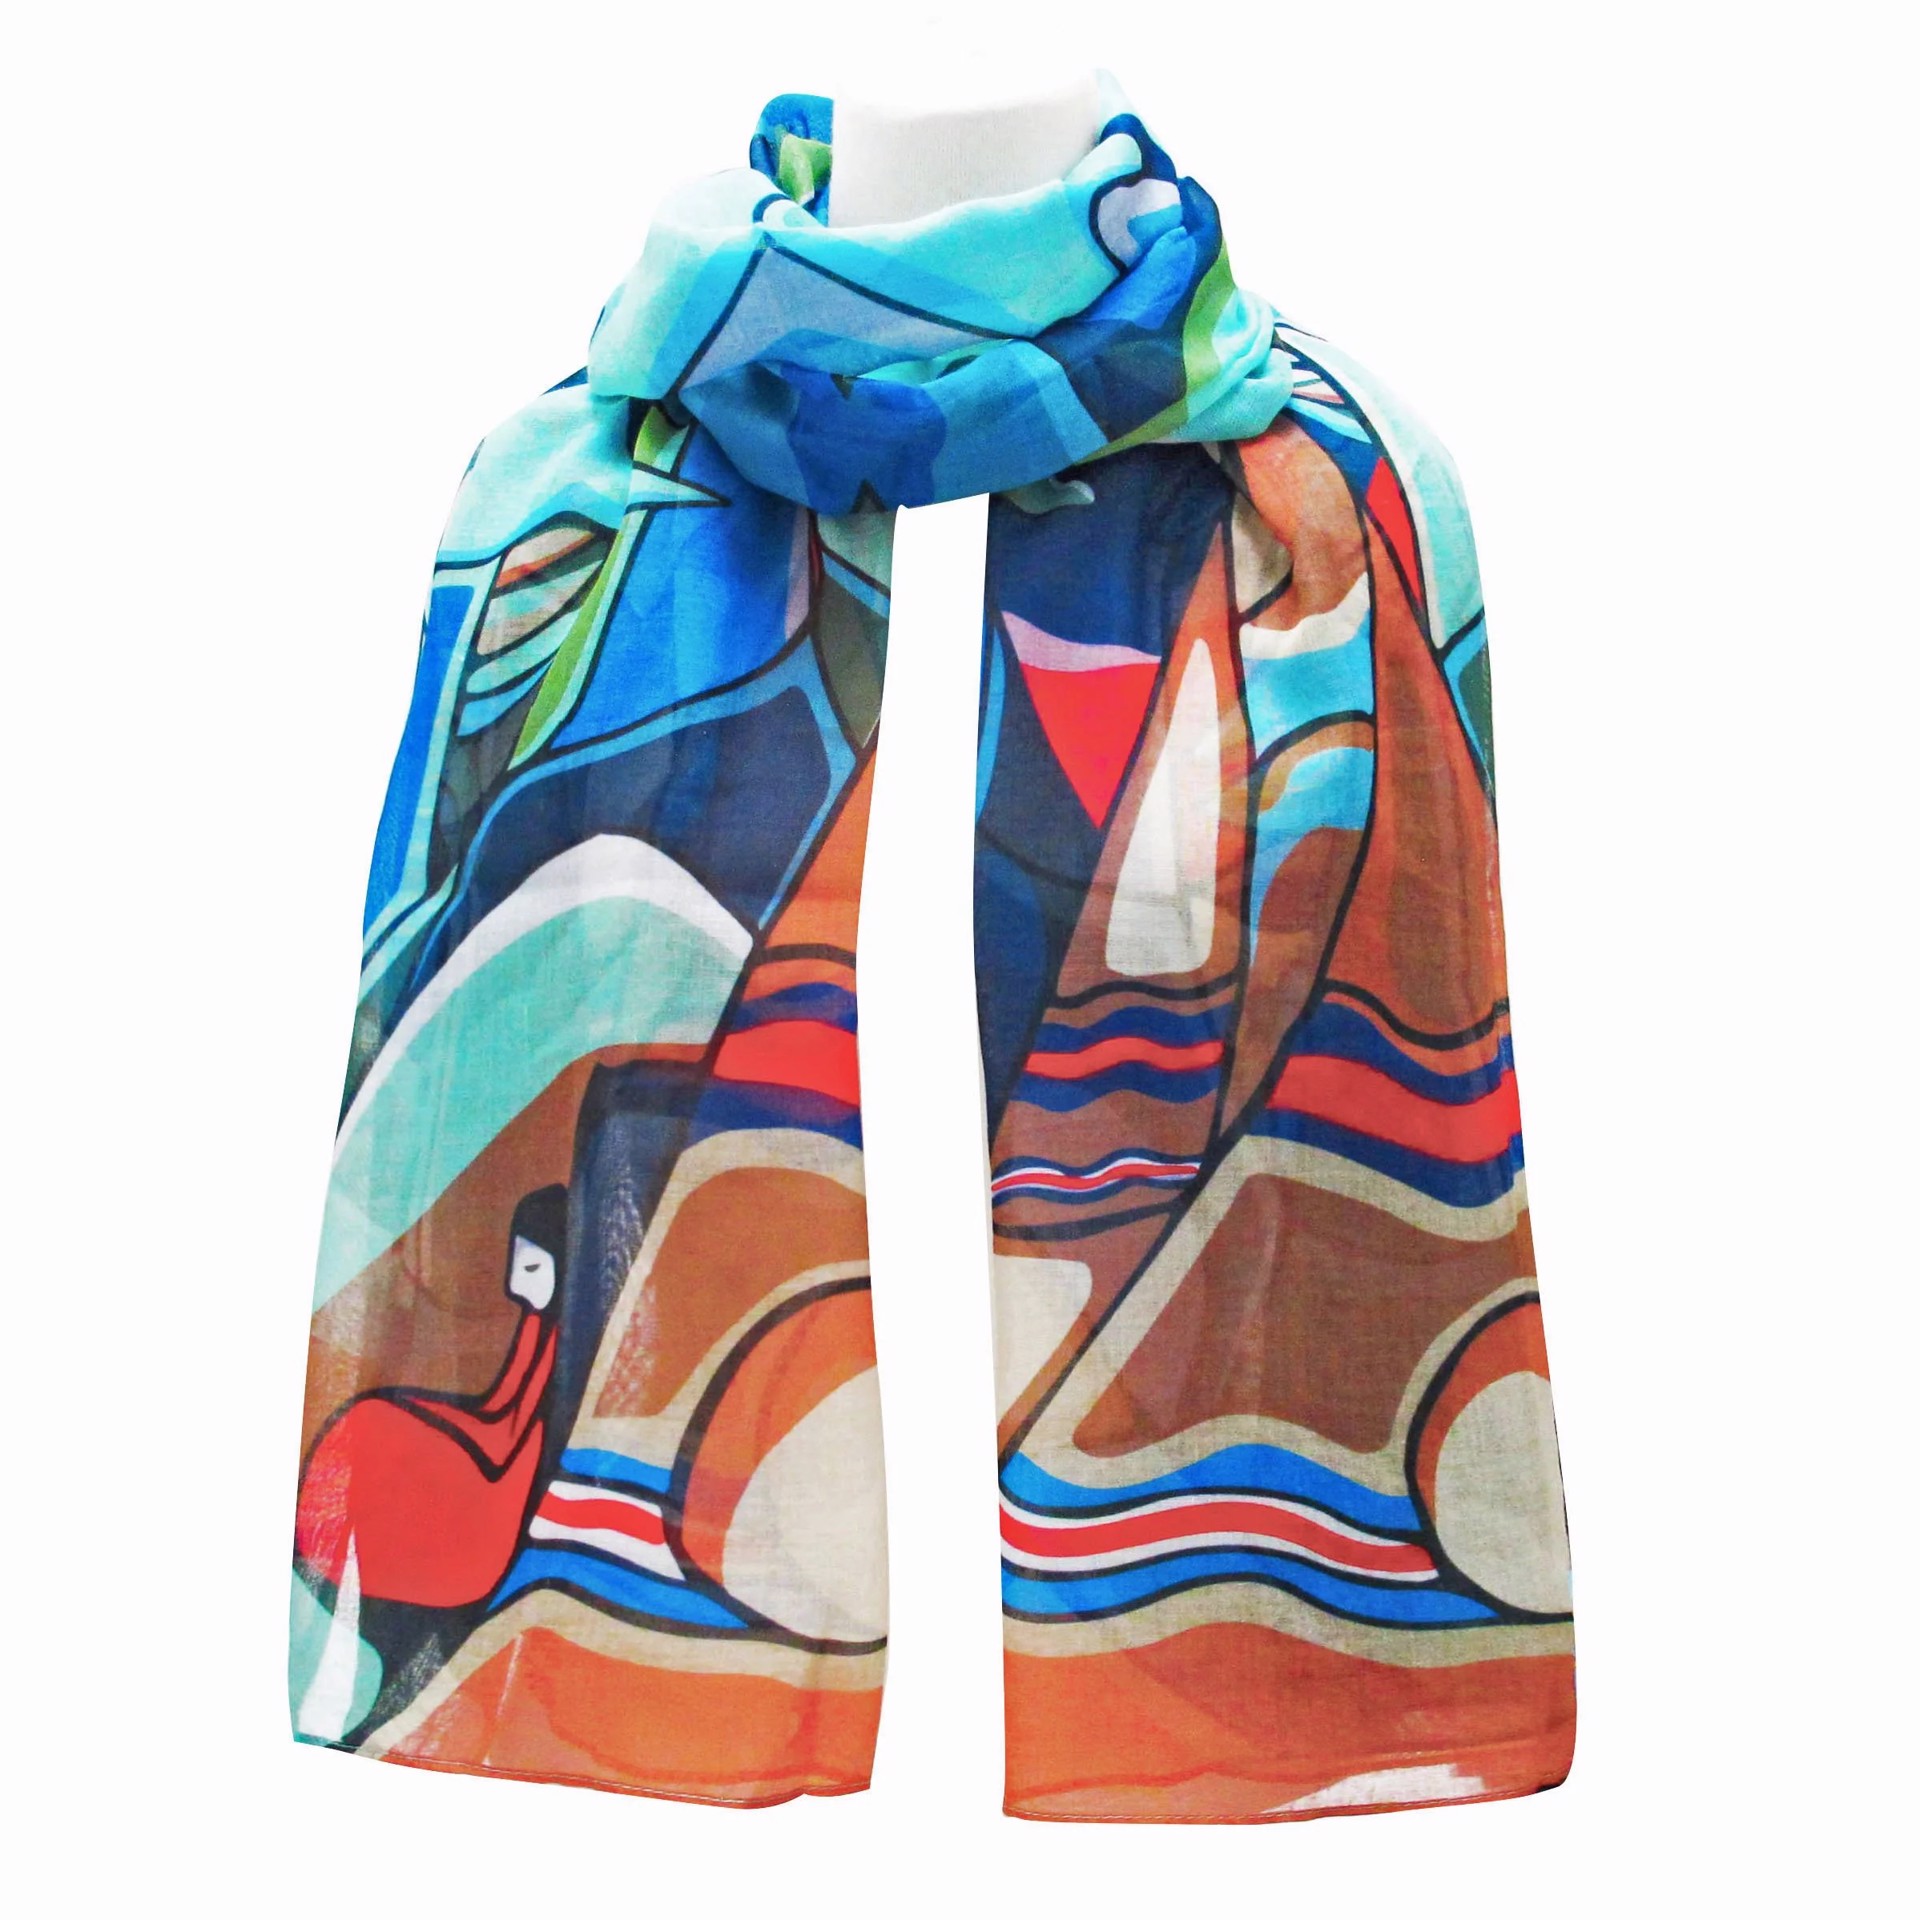 Watched the Sunset Dancer Scarf by Daphne Odjig